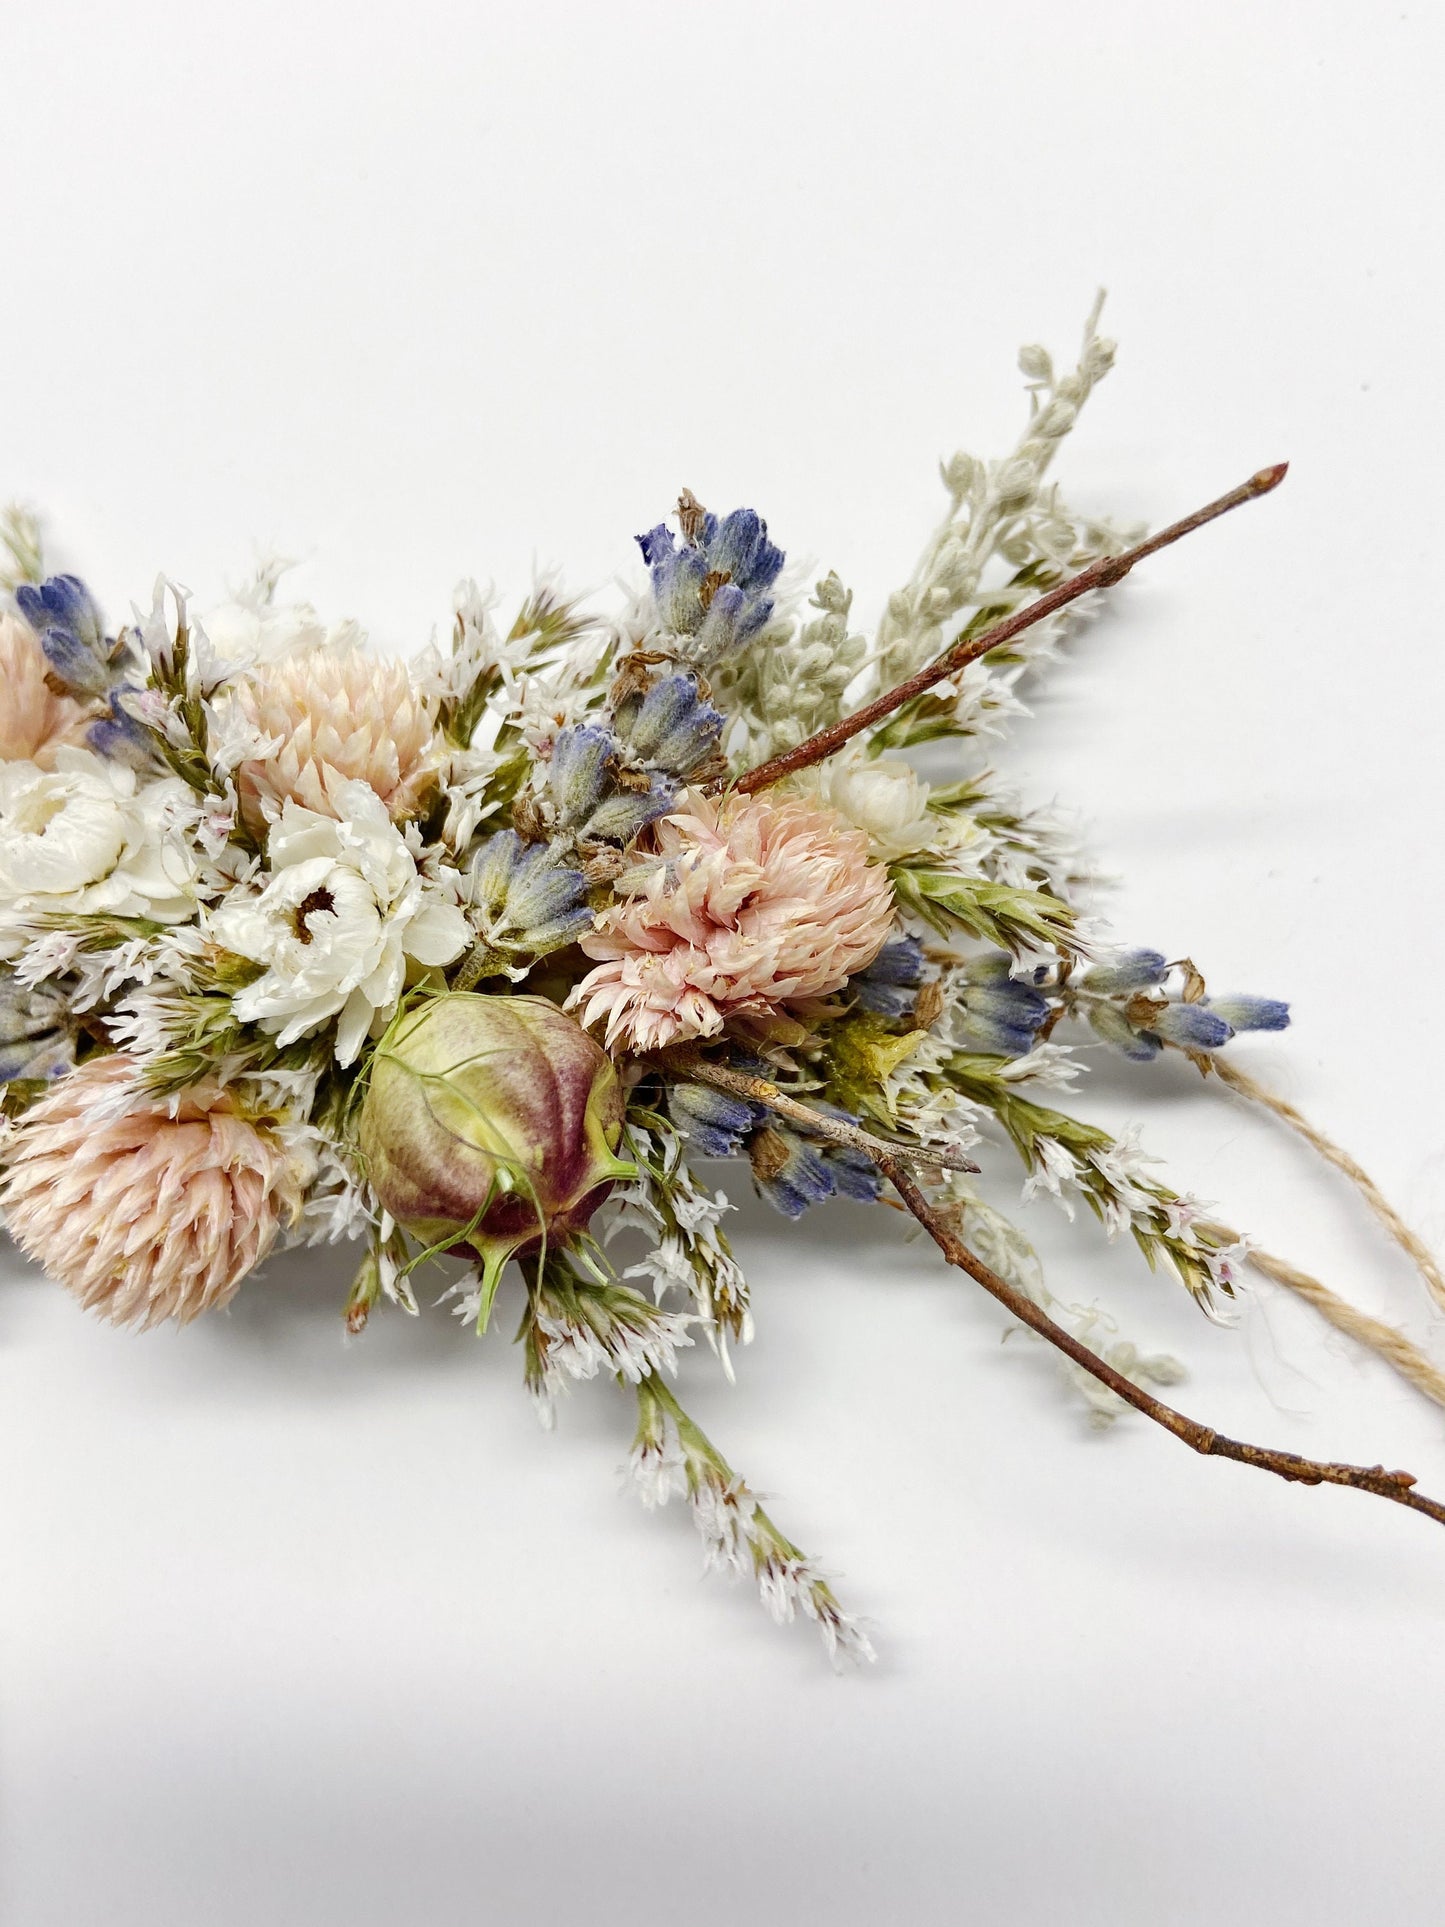 Corsage, wedding accessories, prom, floral corsage, dried flowers, preserved flowers, twine wrap, natural, simple, light color